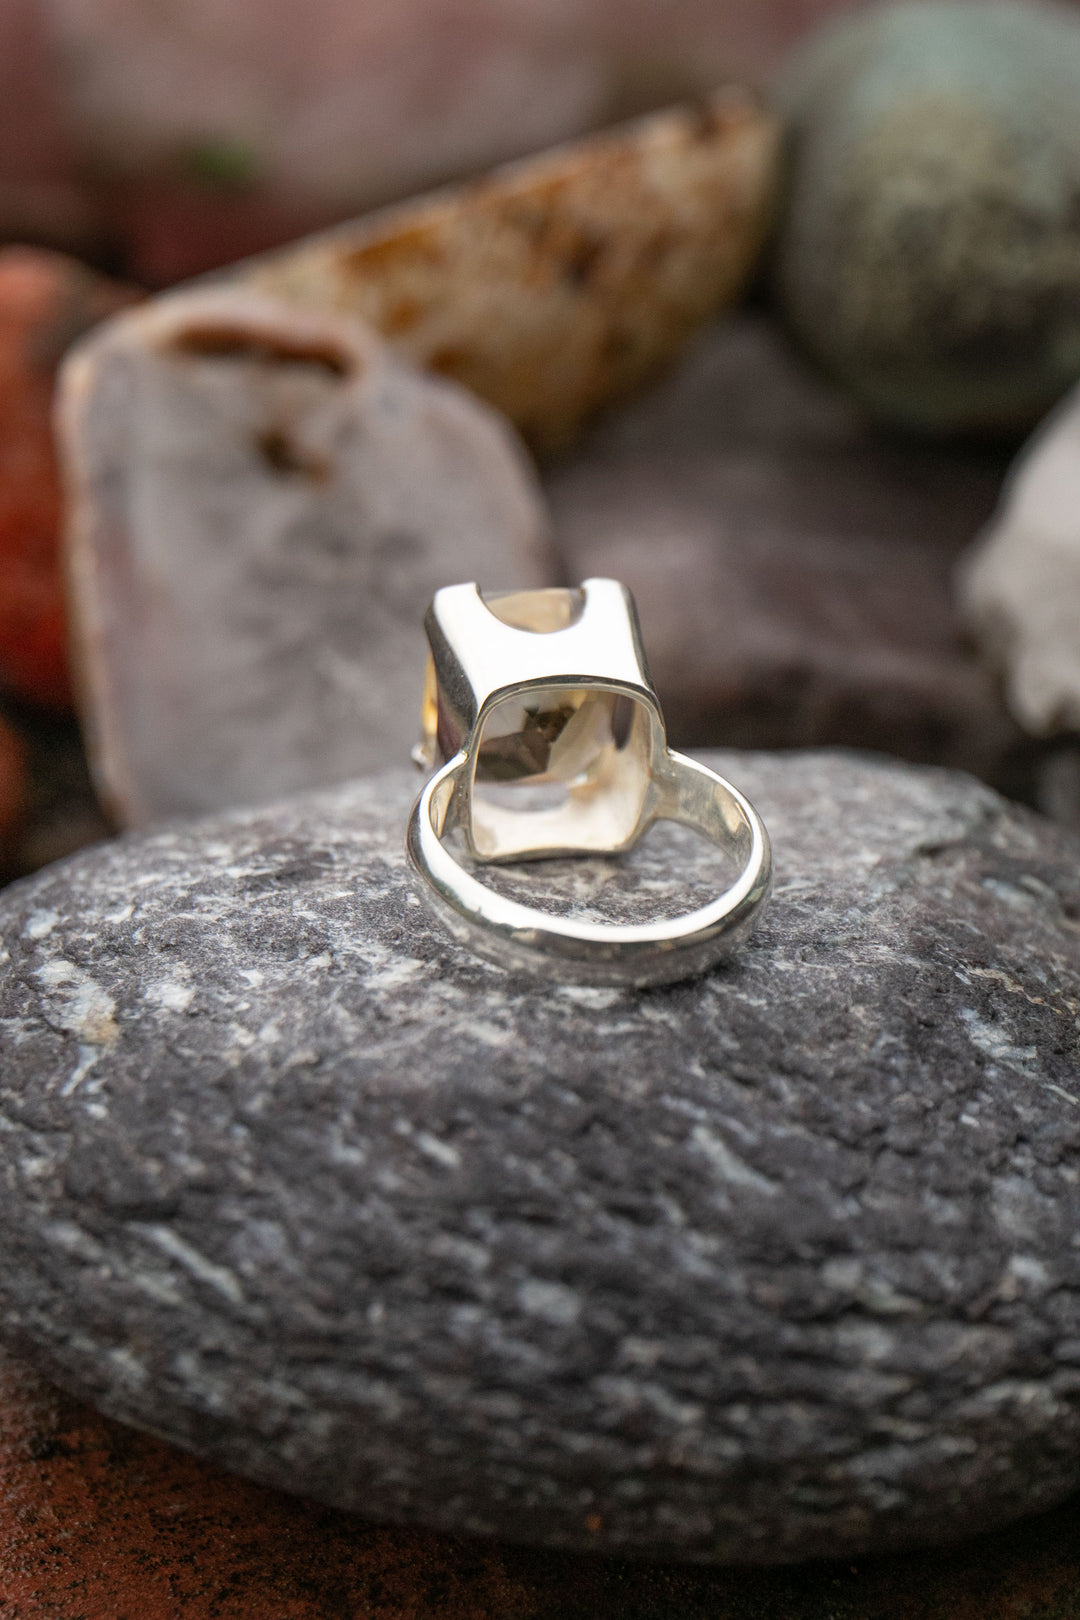 Faceted Citrine Ring set in Sterling Silver - Size 9 US